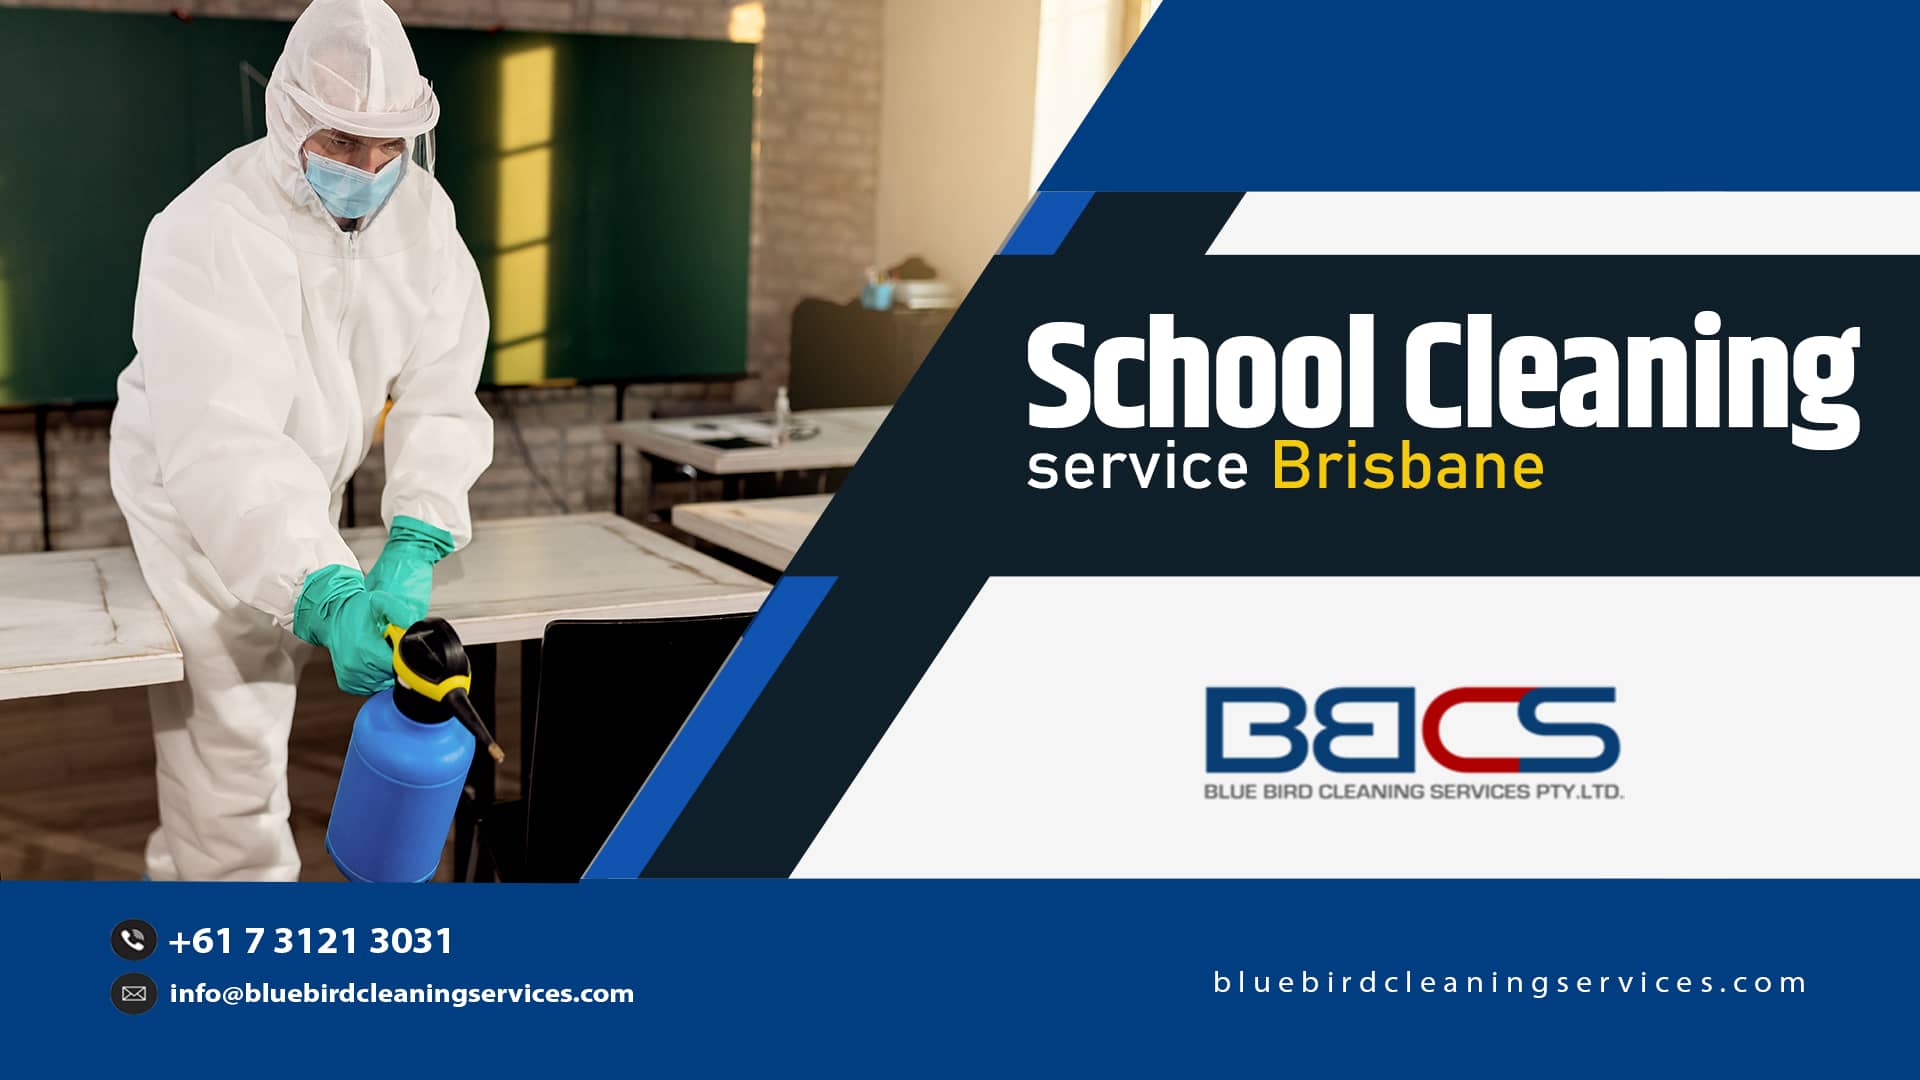 School Cleaning Service- It’s Time To Keep Your School Clean and Bright